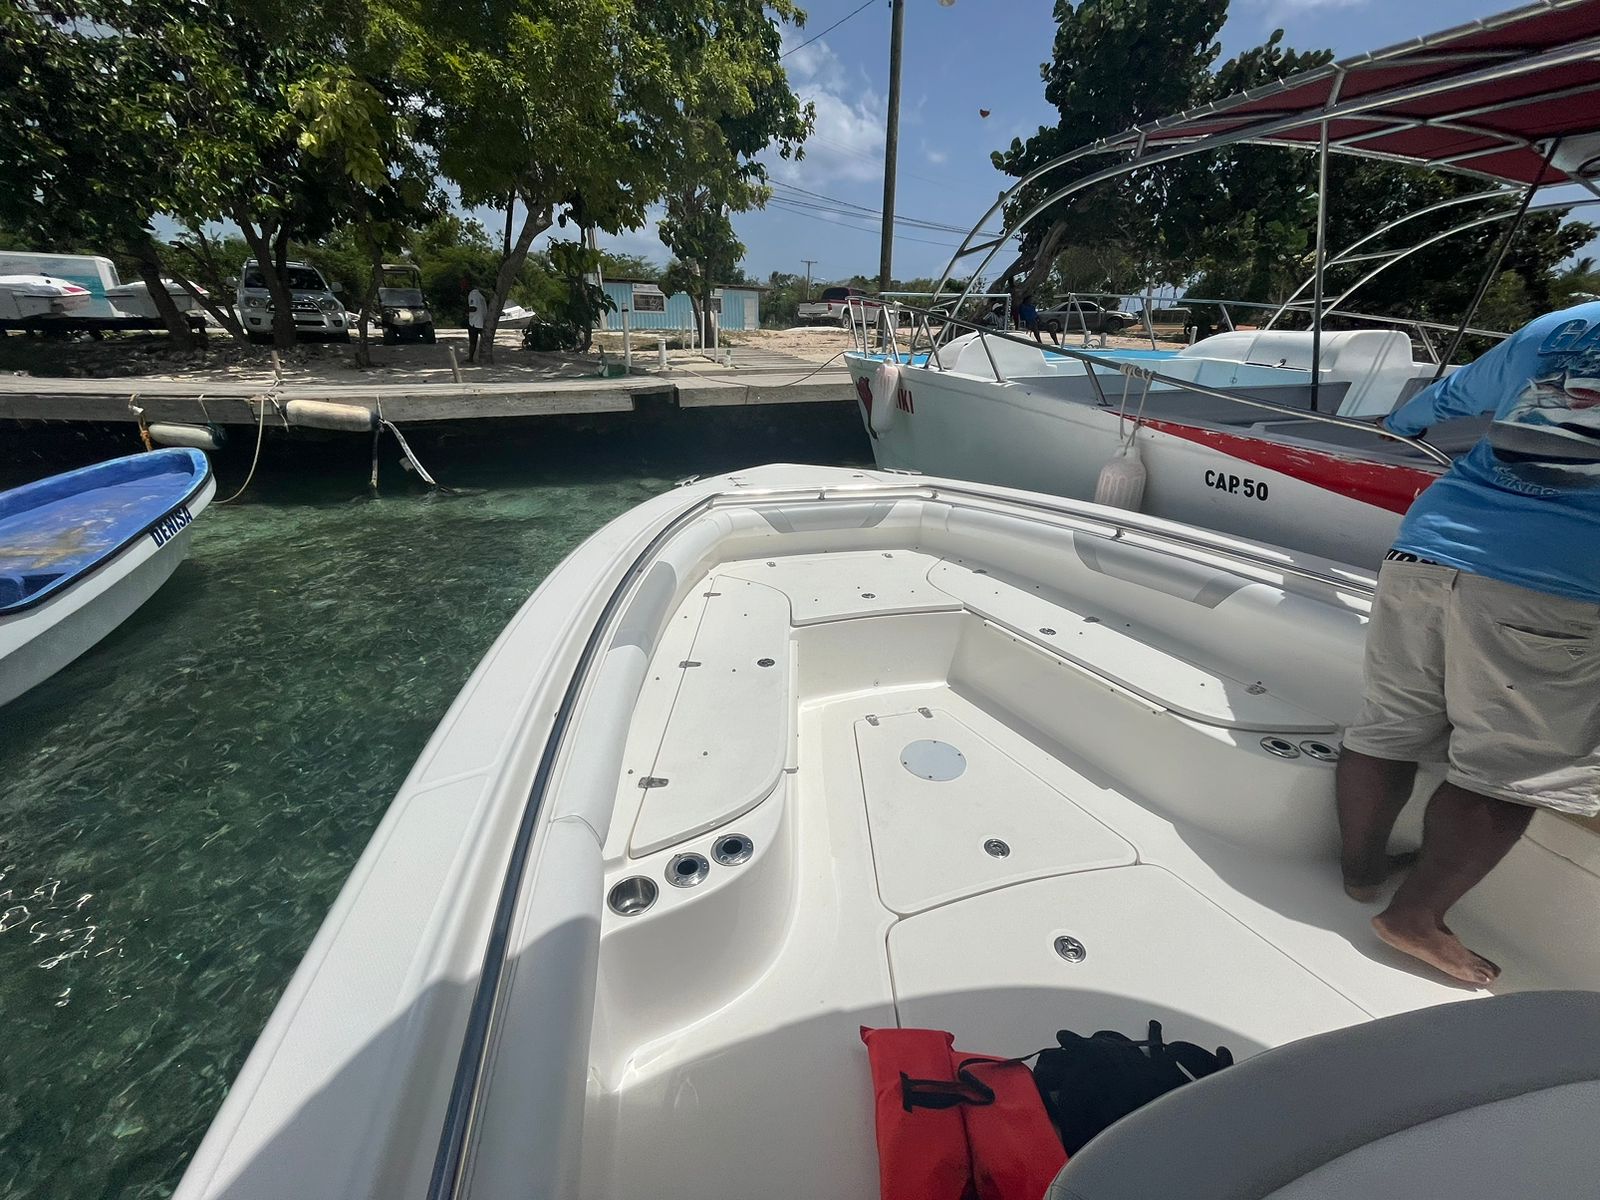 7828826323_Private_boat_rental_from_Bayahibe_to_Saona_or_Catalina_islands_speedboat.jpeg